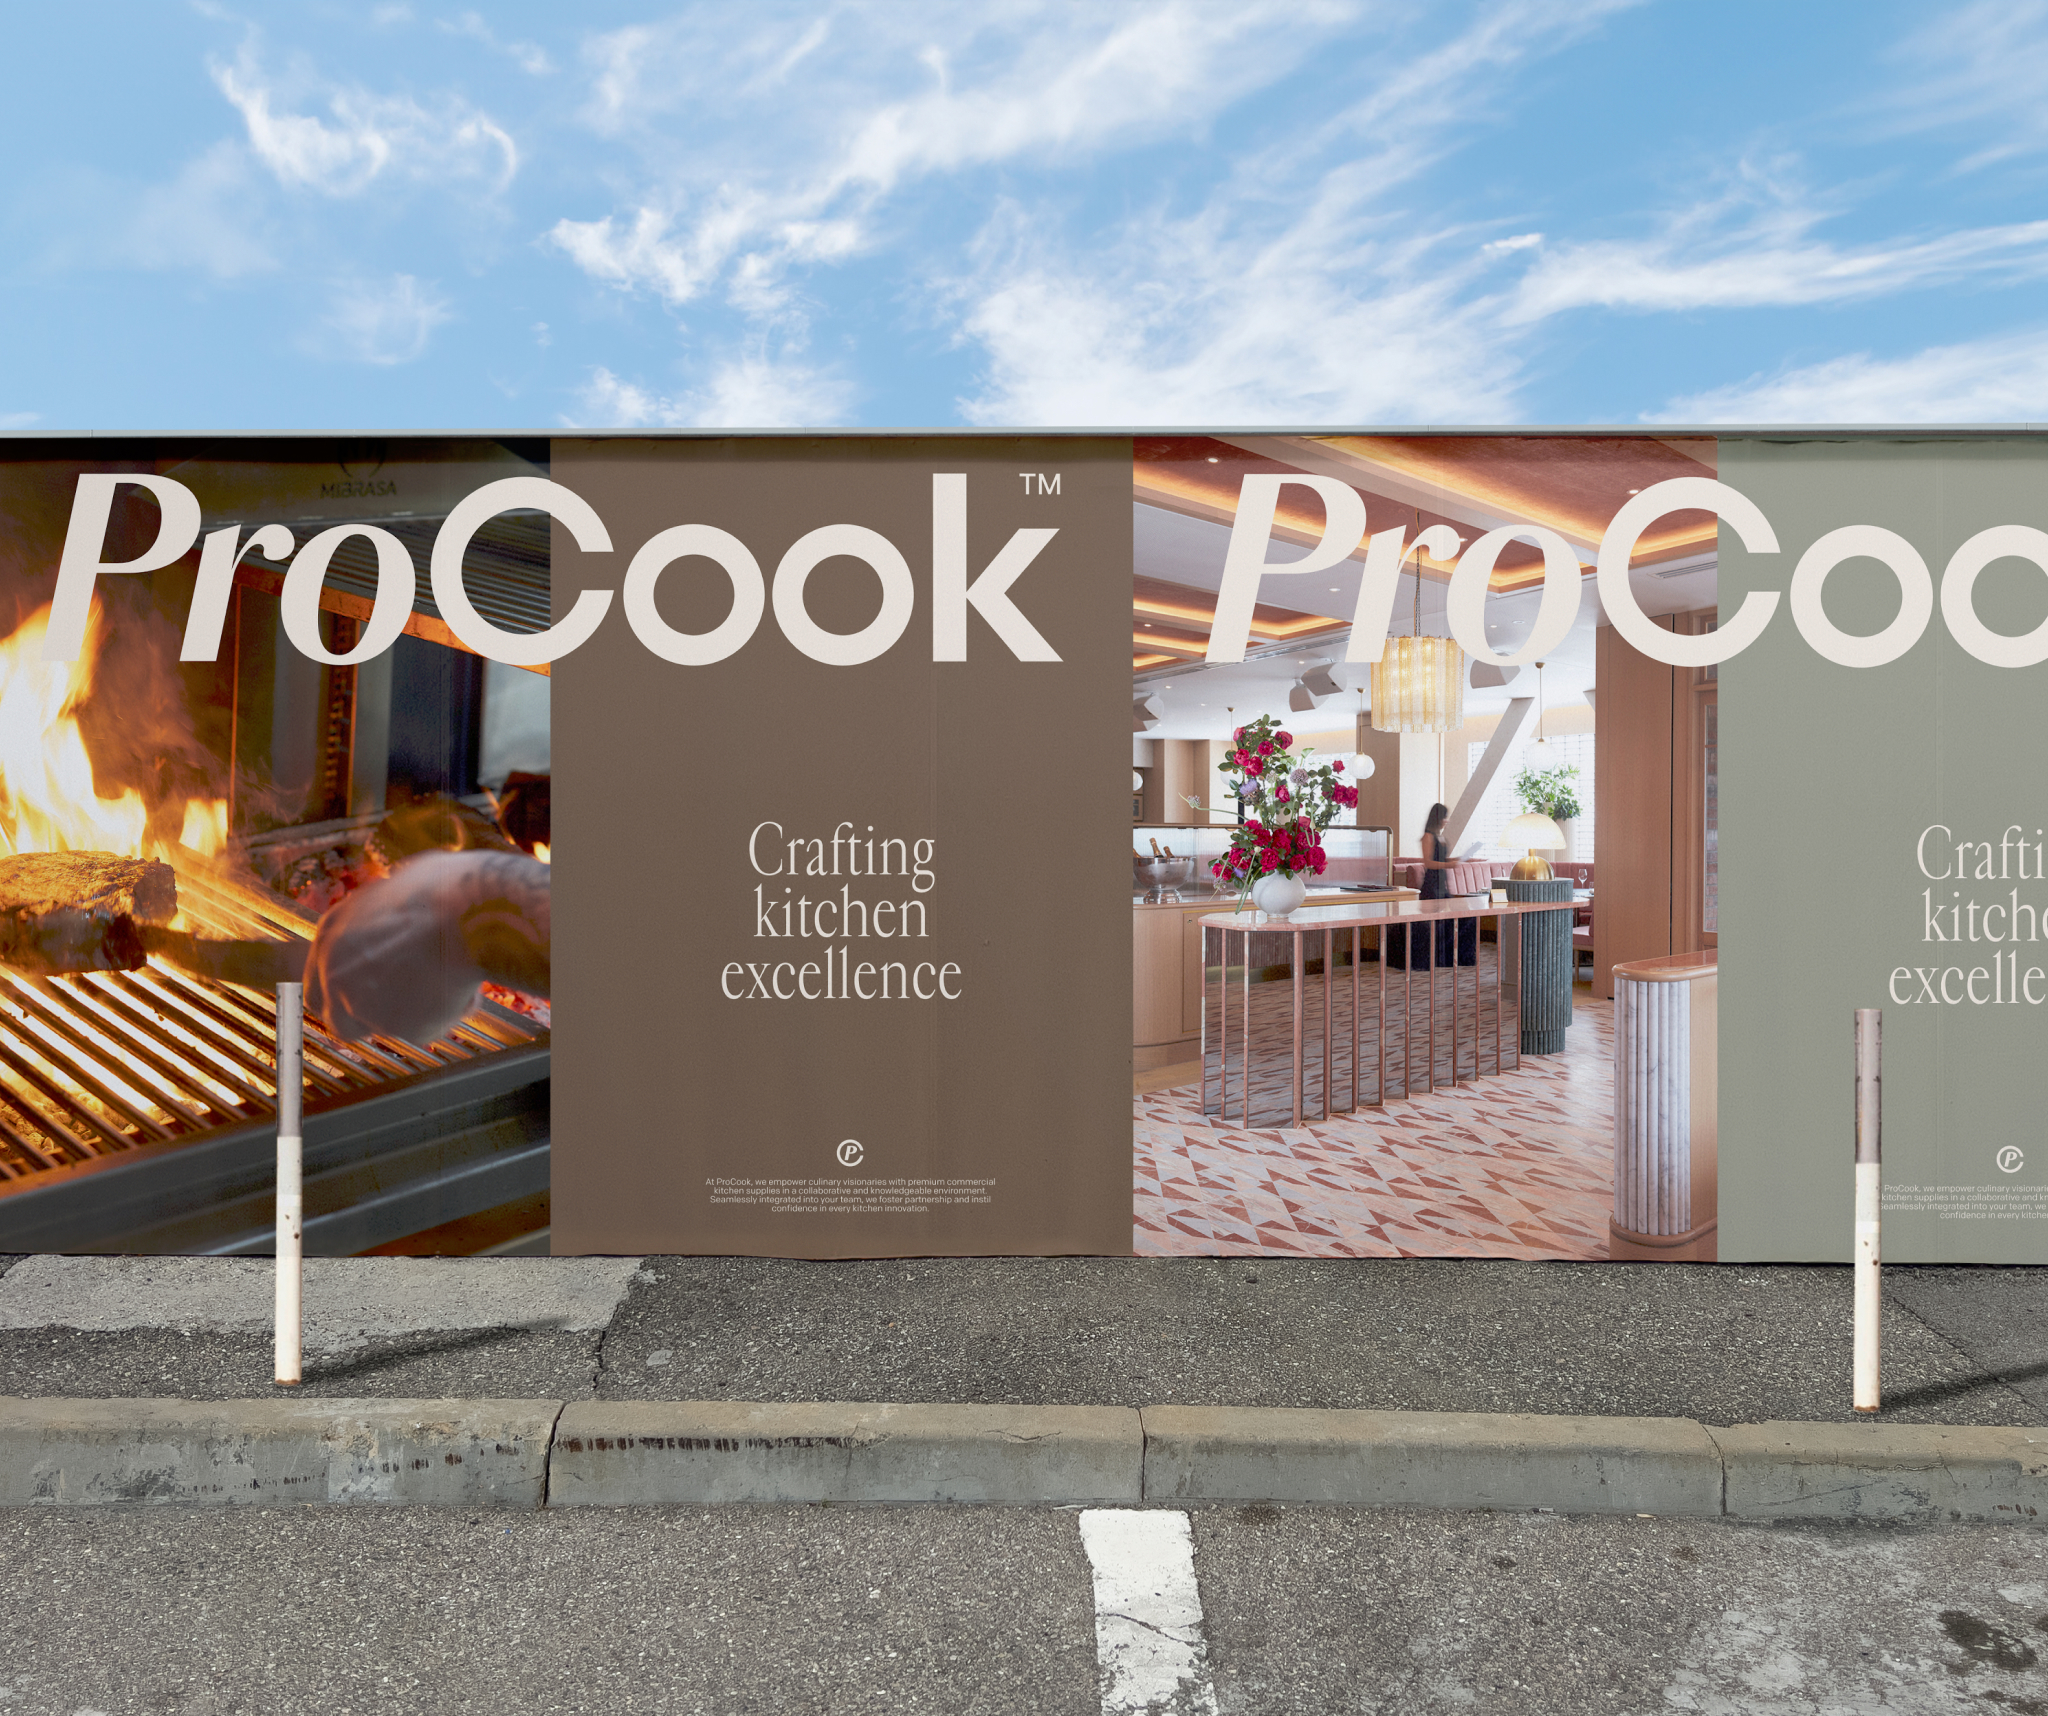 Crafting kitchen excellence with ProCook